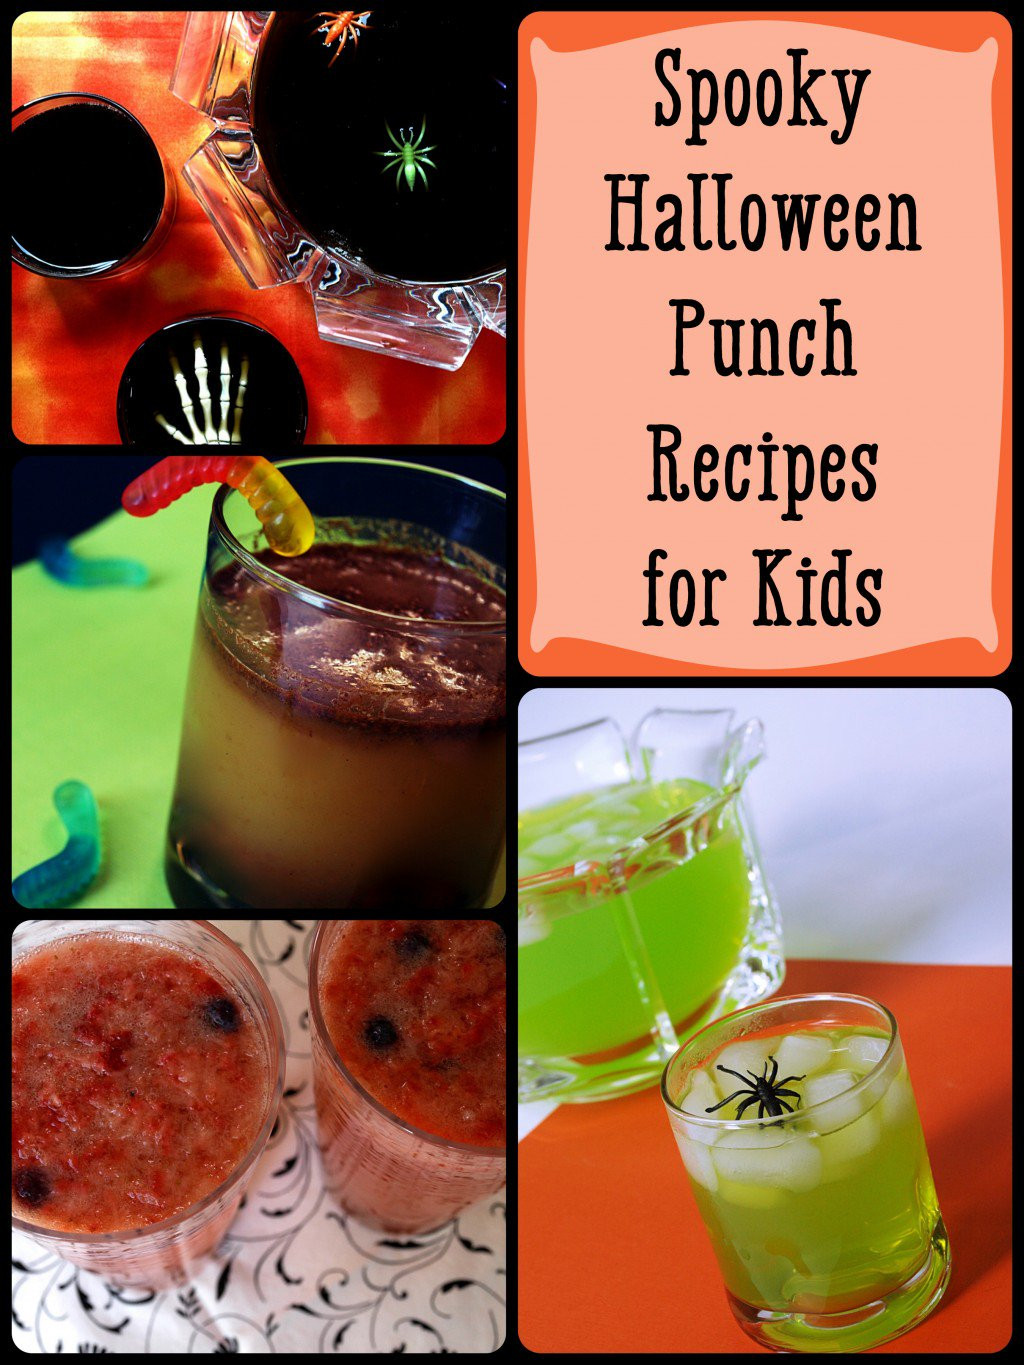 Halloween Food And Drinks
 5 Spooky Halloween Punch Recipes and Drink Ideas for Kids